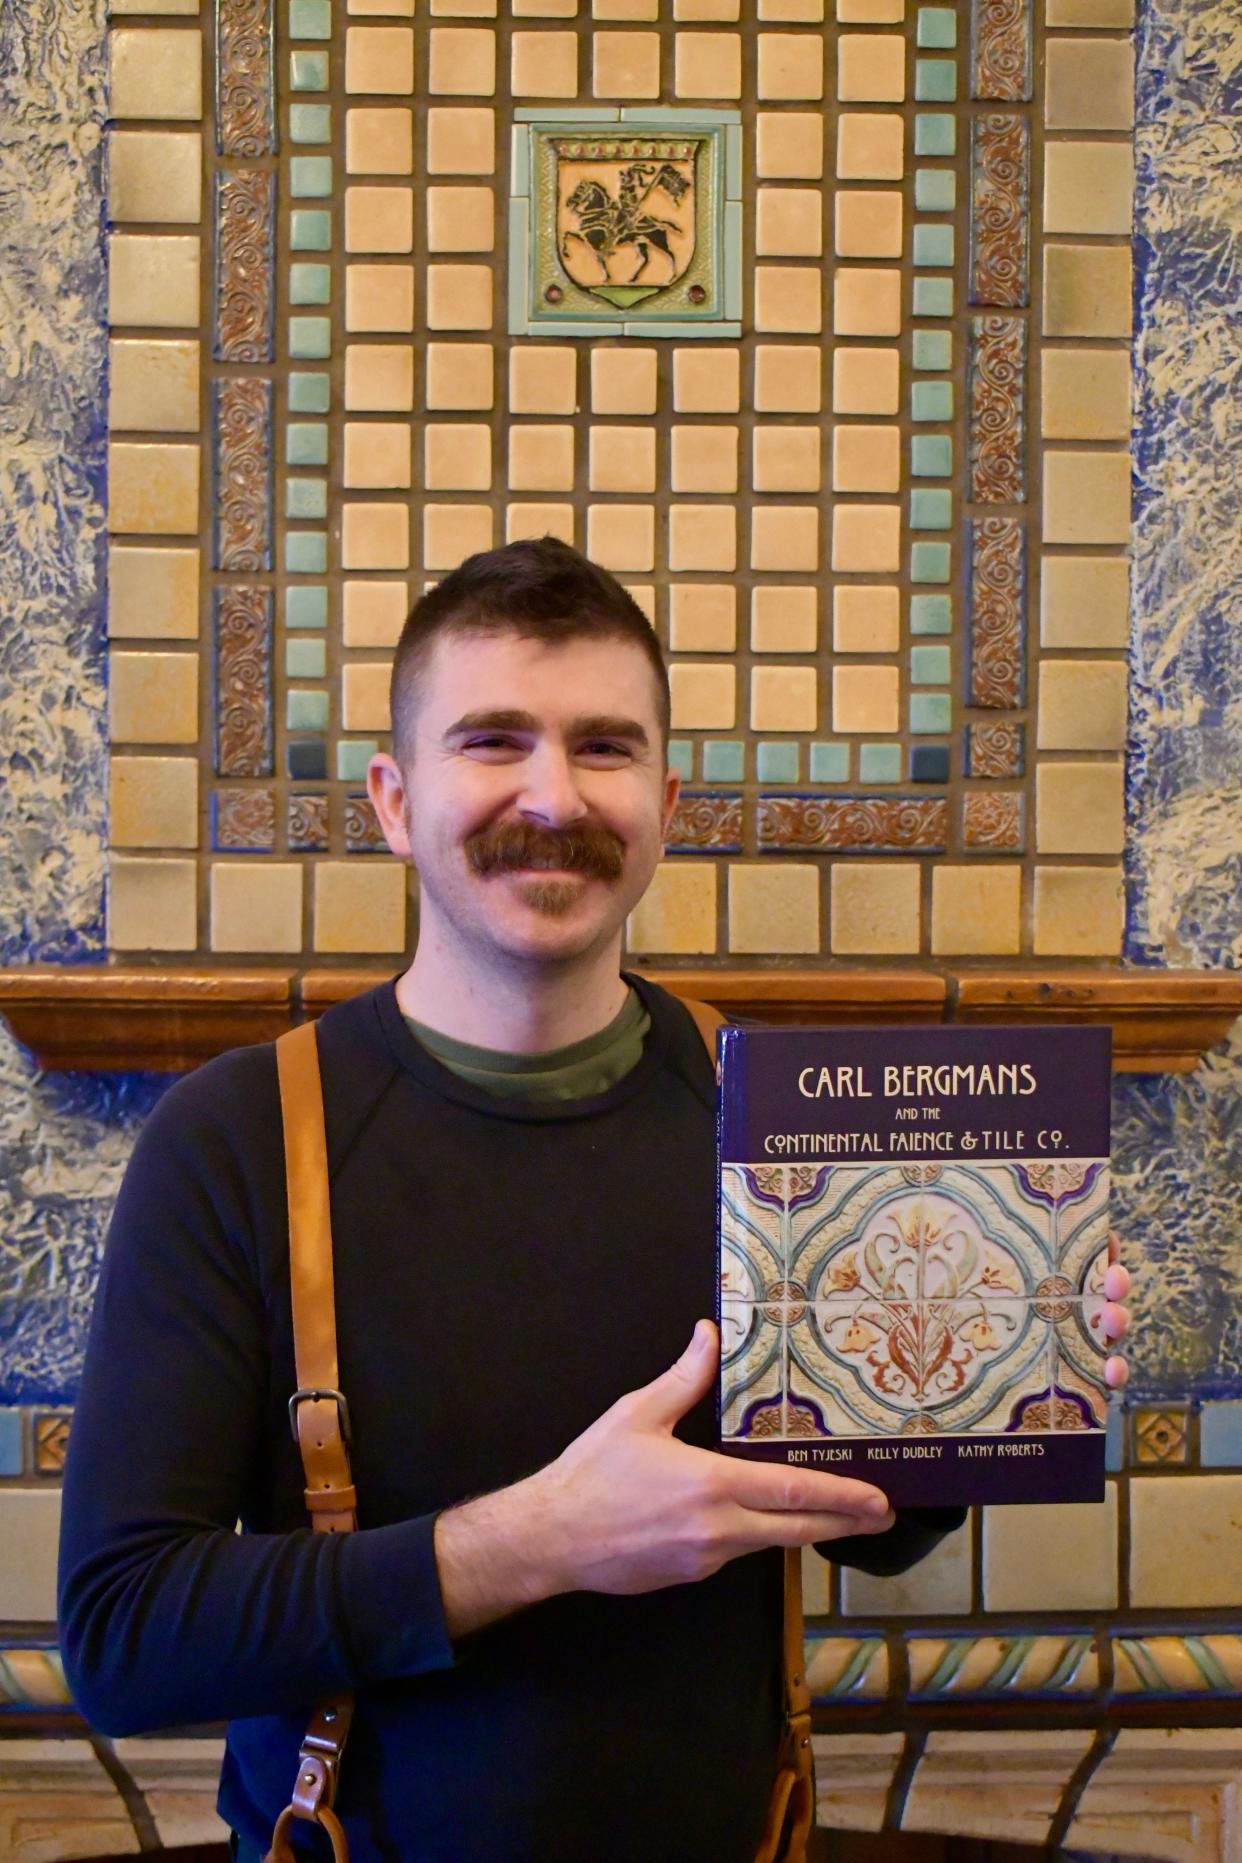 Author Ben Tyjeski is shown with his new book, "Carl Bergmans and the Continental Faience & Tile Co.," next to a fireplace with Continental tiles in Racine.